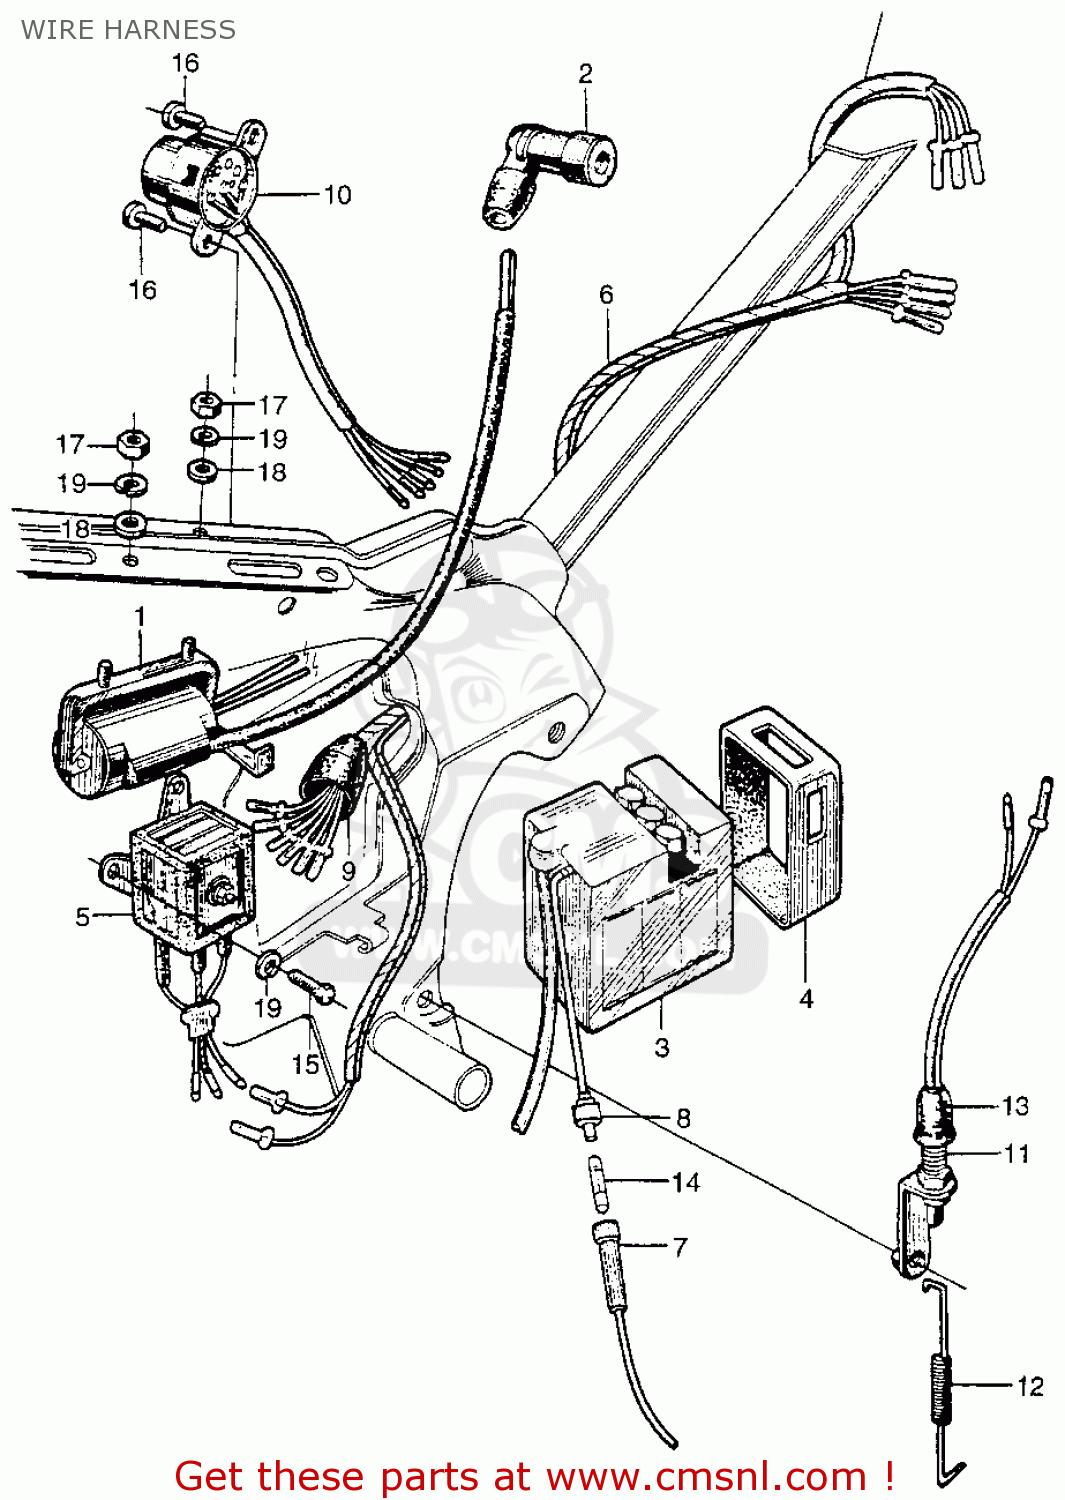 Custom Motorcycle Wiring Diagram from images.cmsnl.com